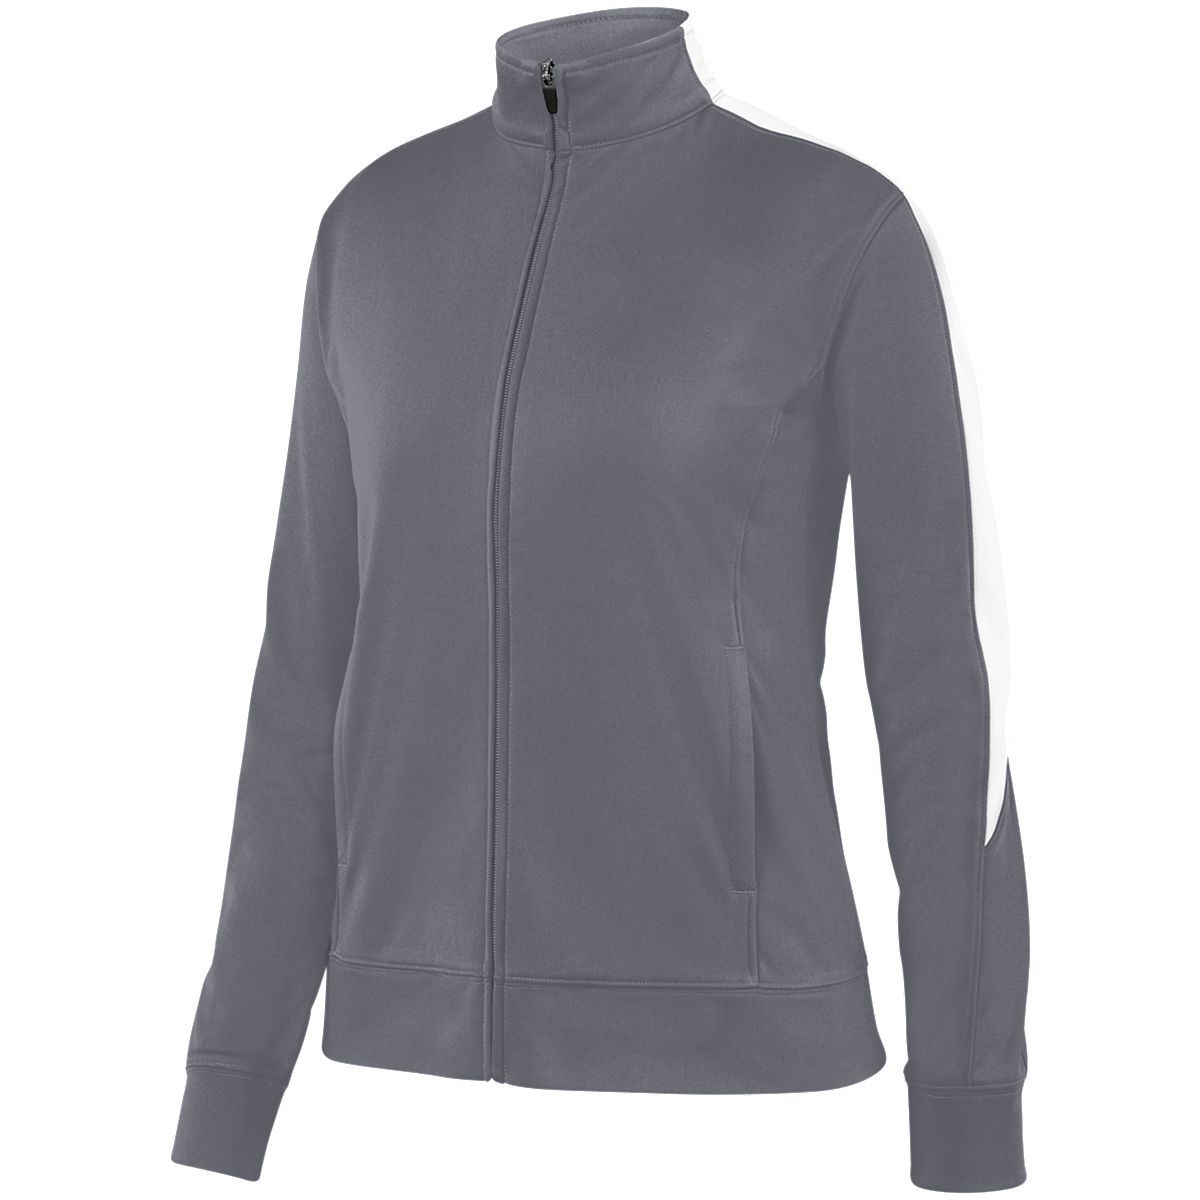 Augusta Sportswear Ladies Medalist Jacket 2.0 in Graphite/White  -Part of the Ladies, Ladies-Jacket, Augusta-Products, Outerwear product lines at KanaleyCreations.com